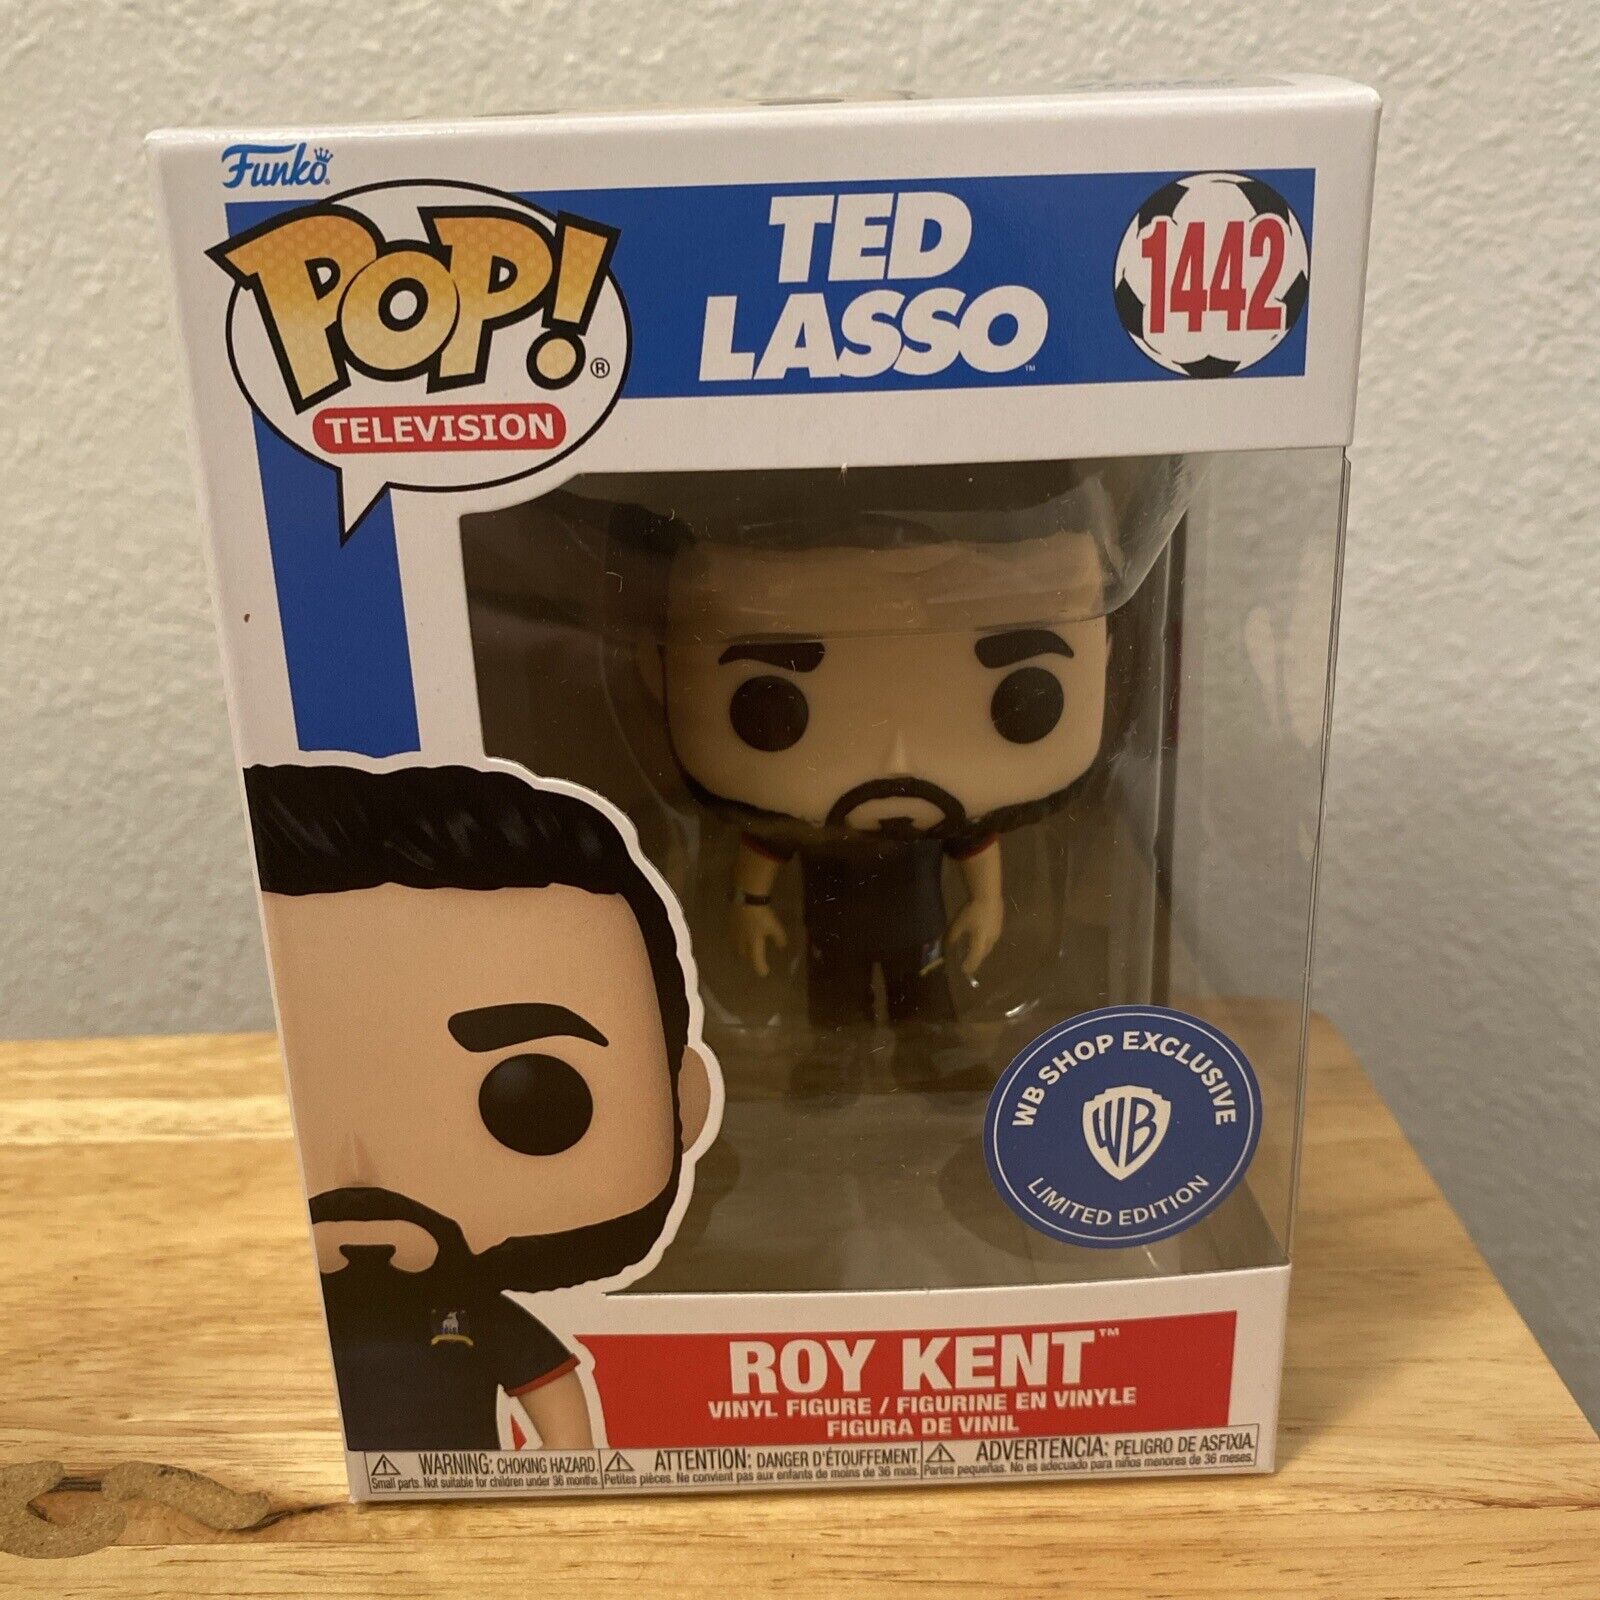 Funko POP Television Ted Lasso ROY KENT COACH OUTFIT WB Shop Exclusive #1442